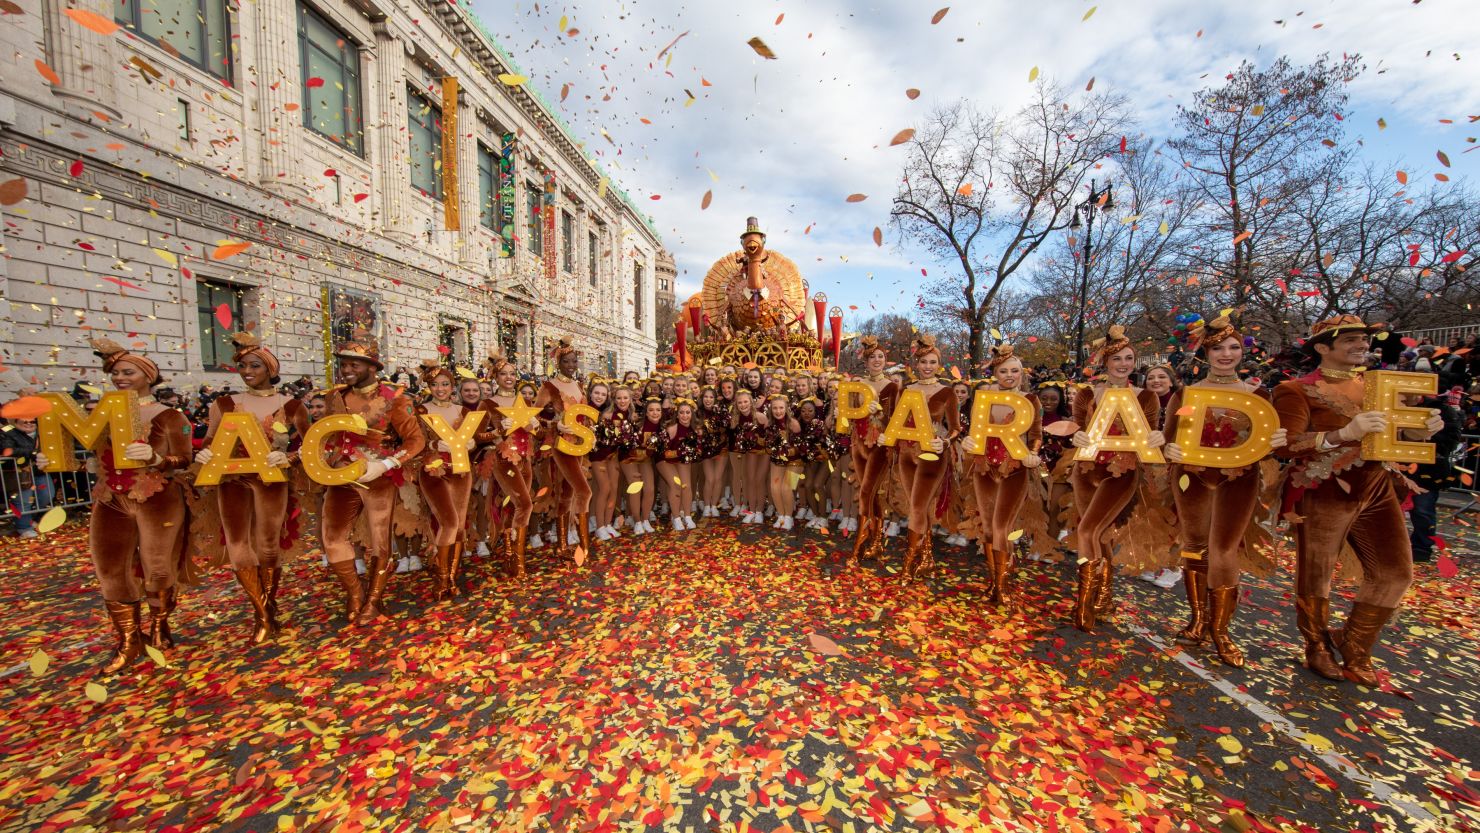 Opening of Macy's Thanksgiving Day Parade